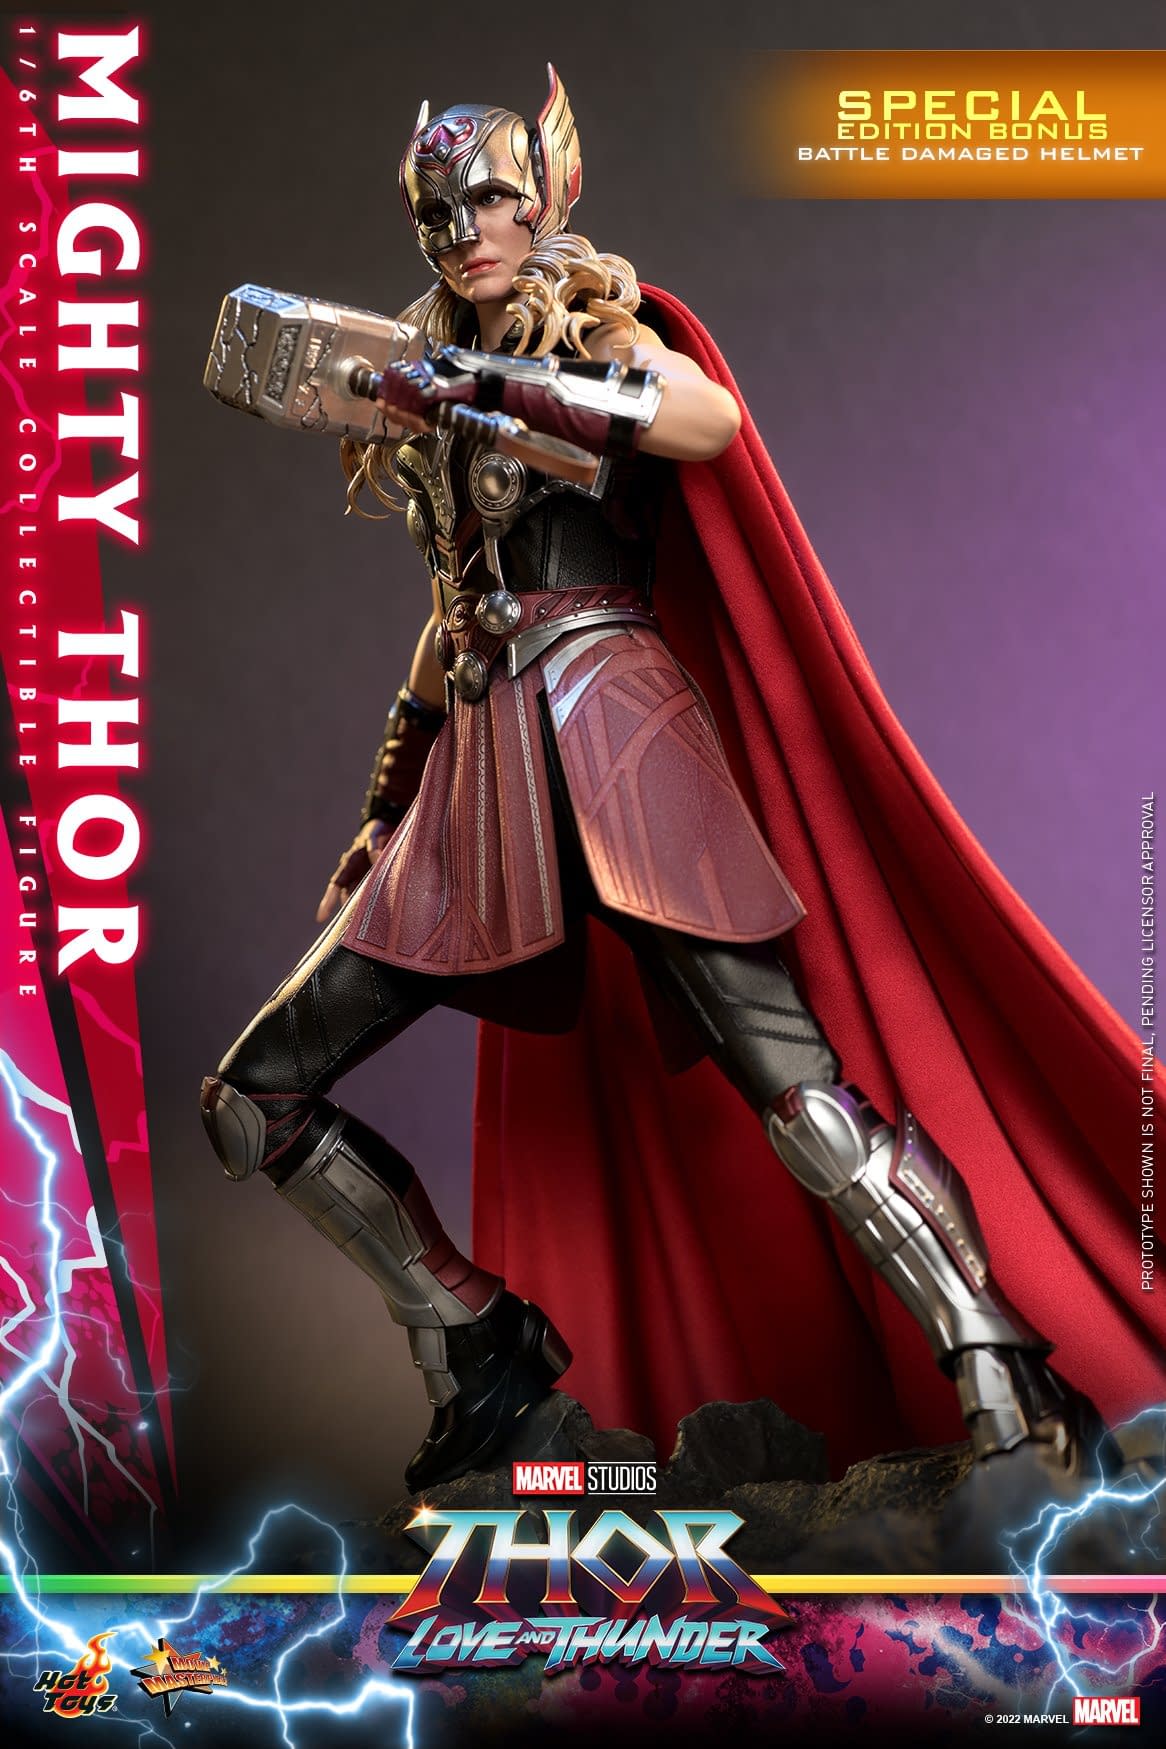 Hot Toys Puts the Hammer Down with Jane Foster Thor Figure 